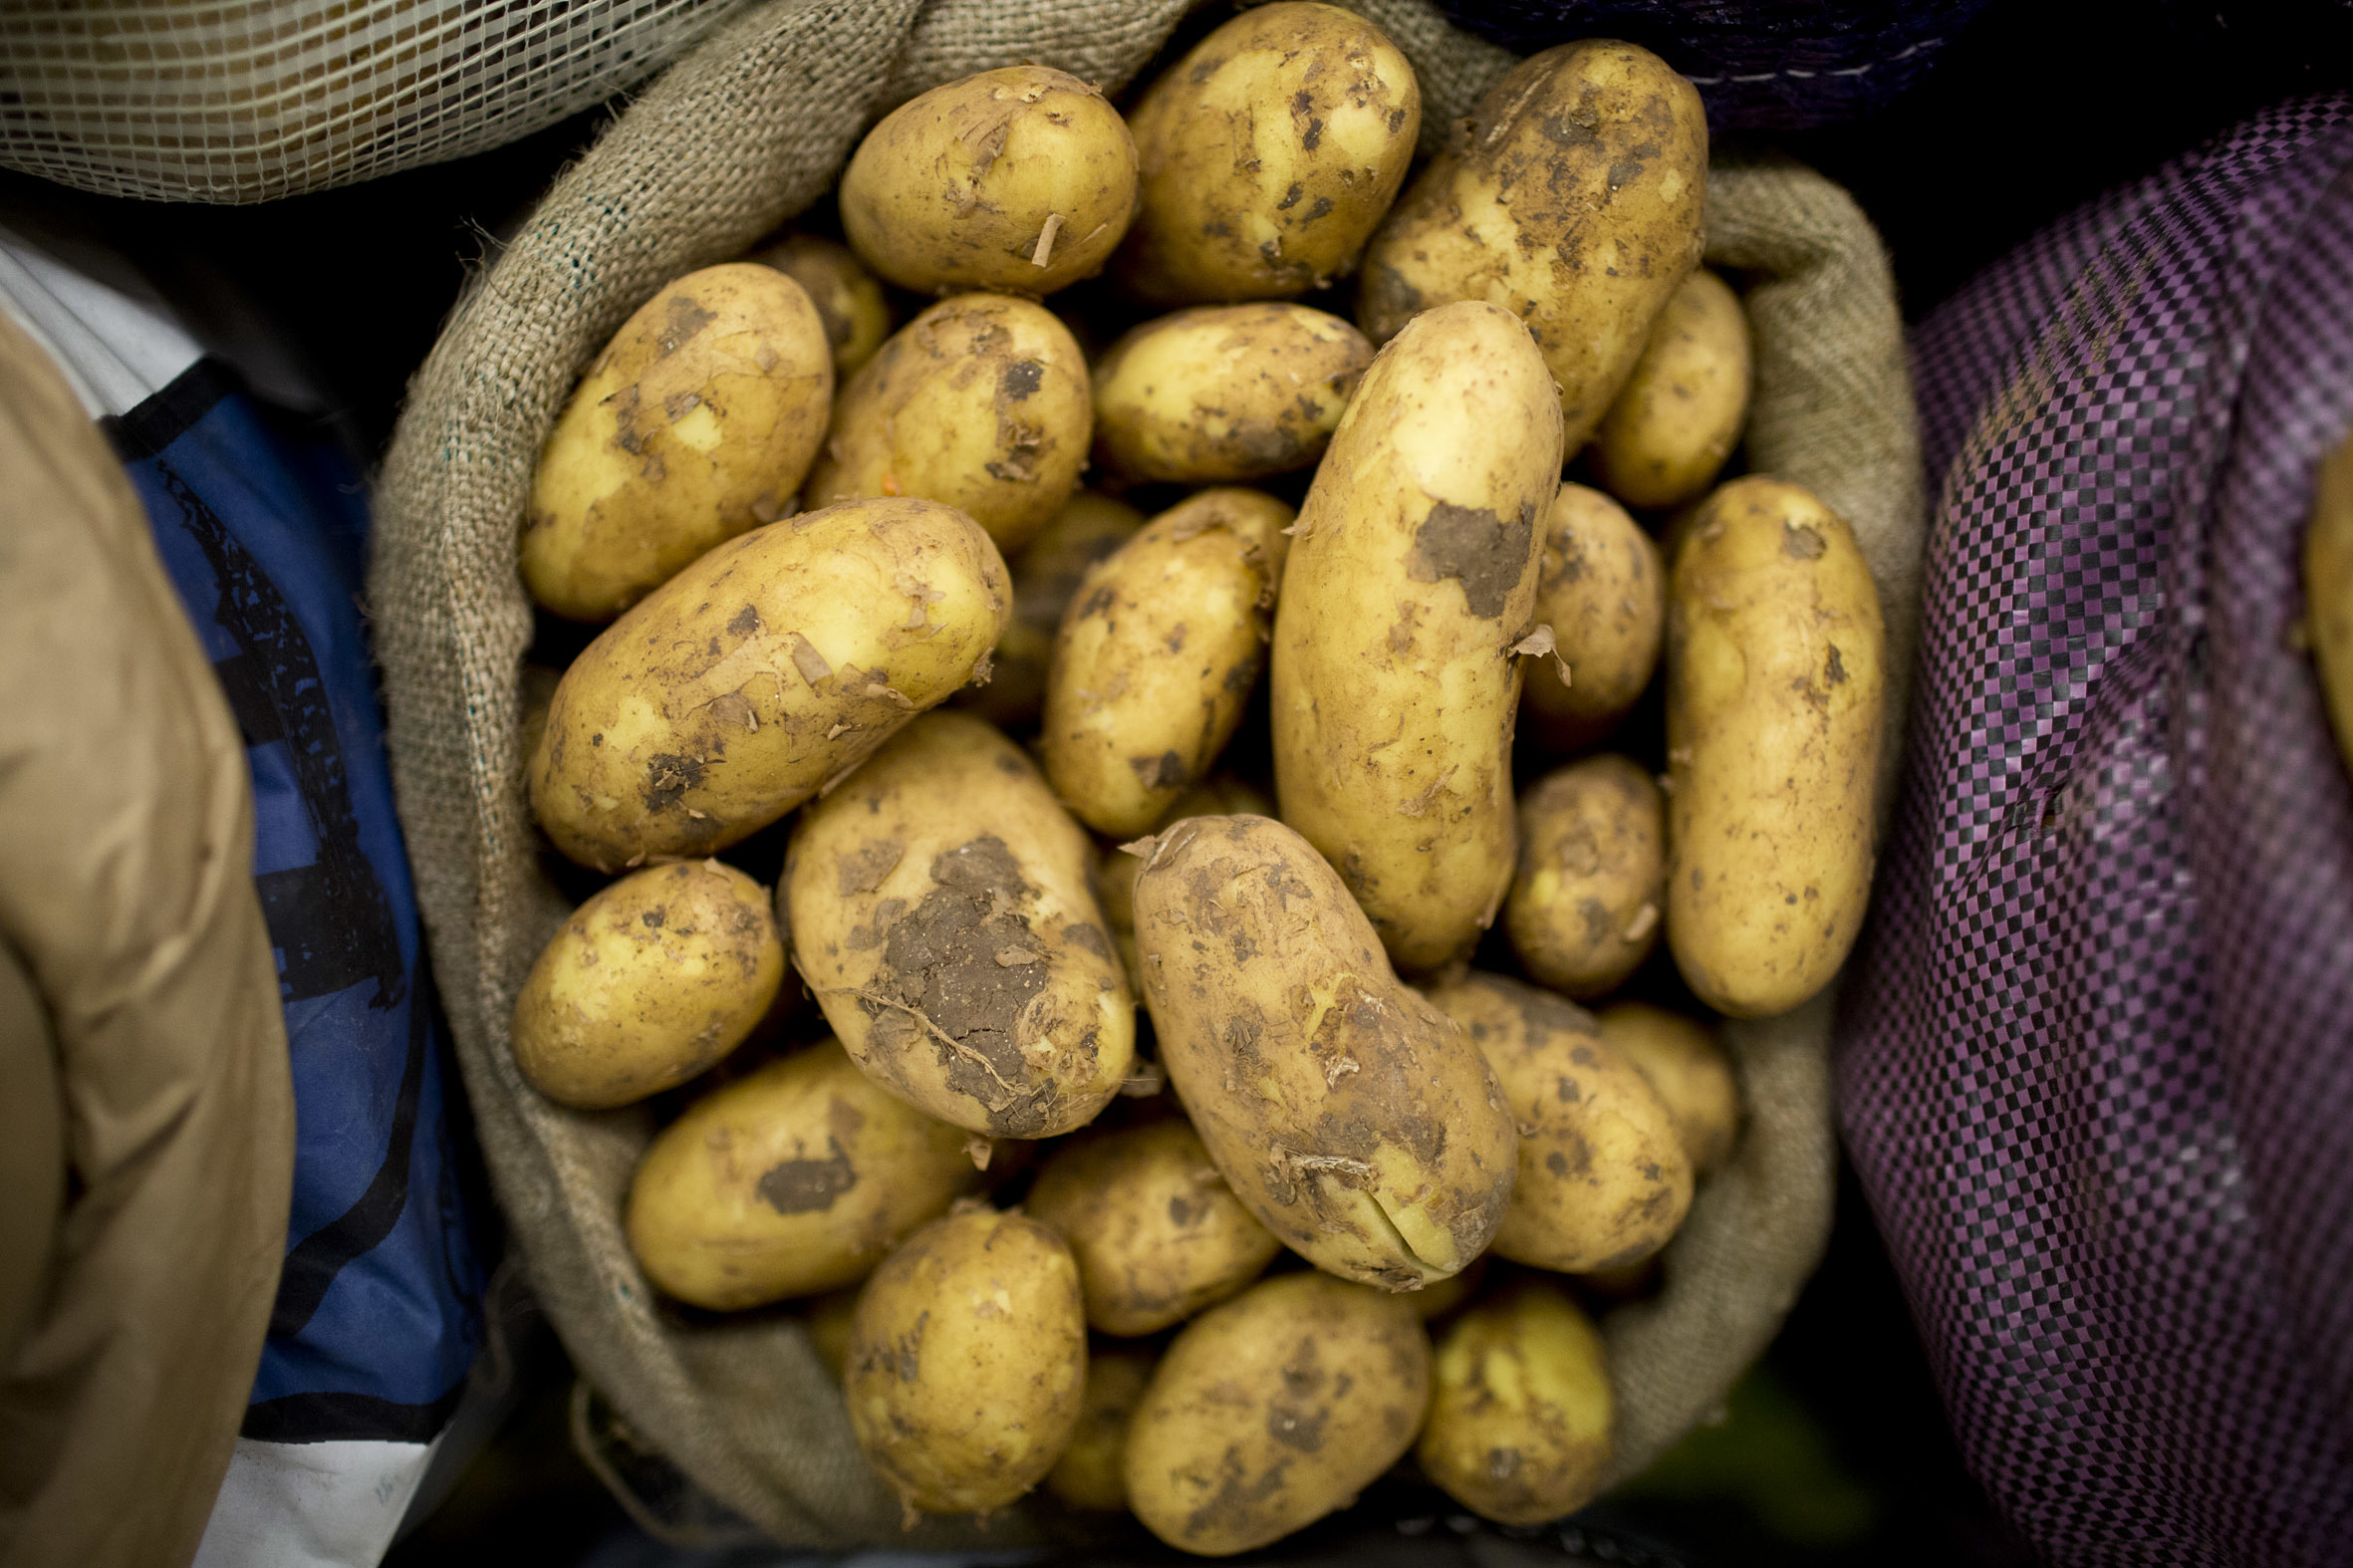 fruit-and-vegetable-market-report-march-2014-cyprus-potatoes.jpg?mtime=20170922112627#asset:11324